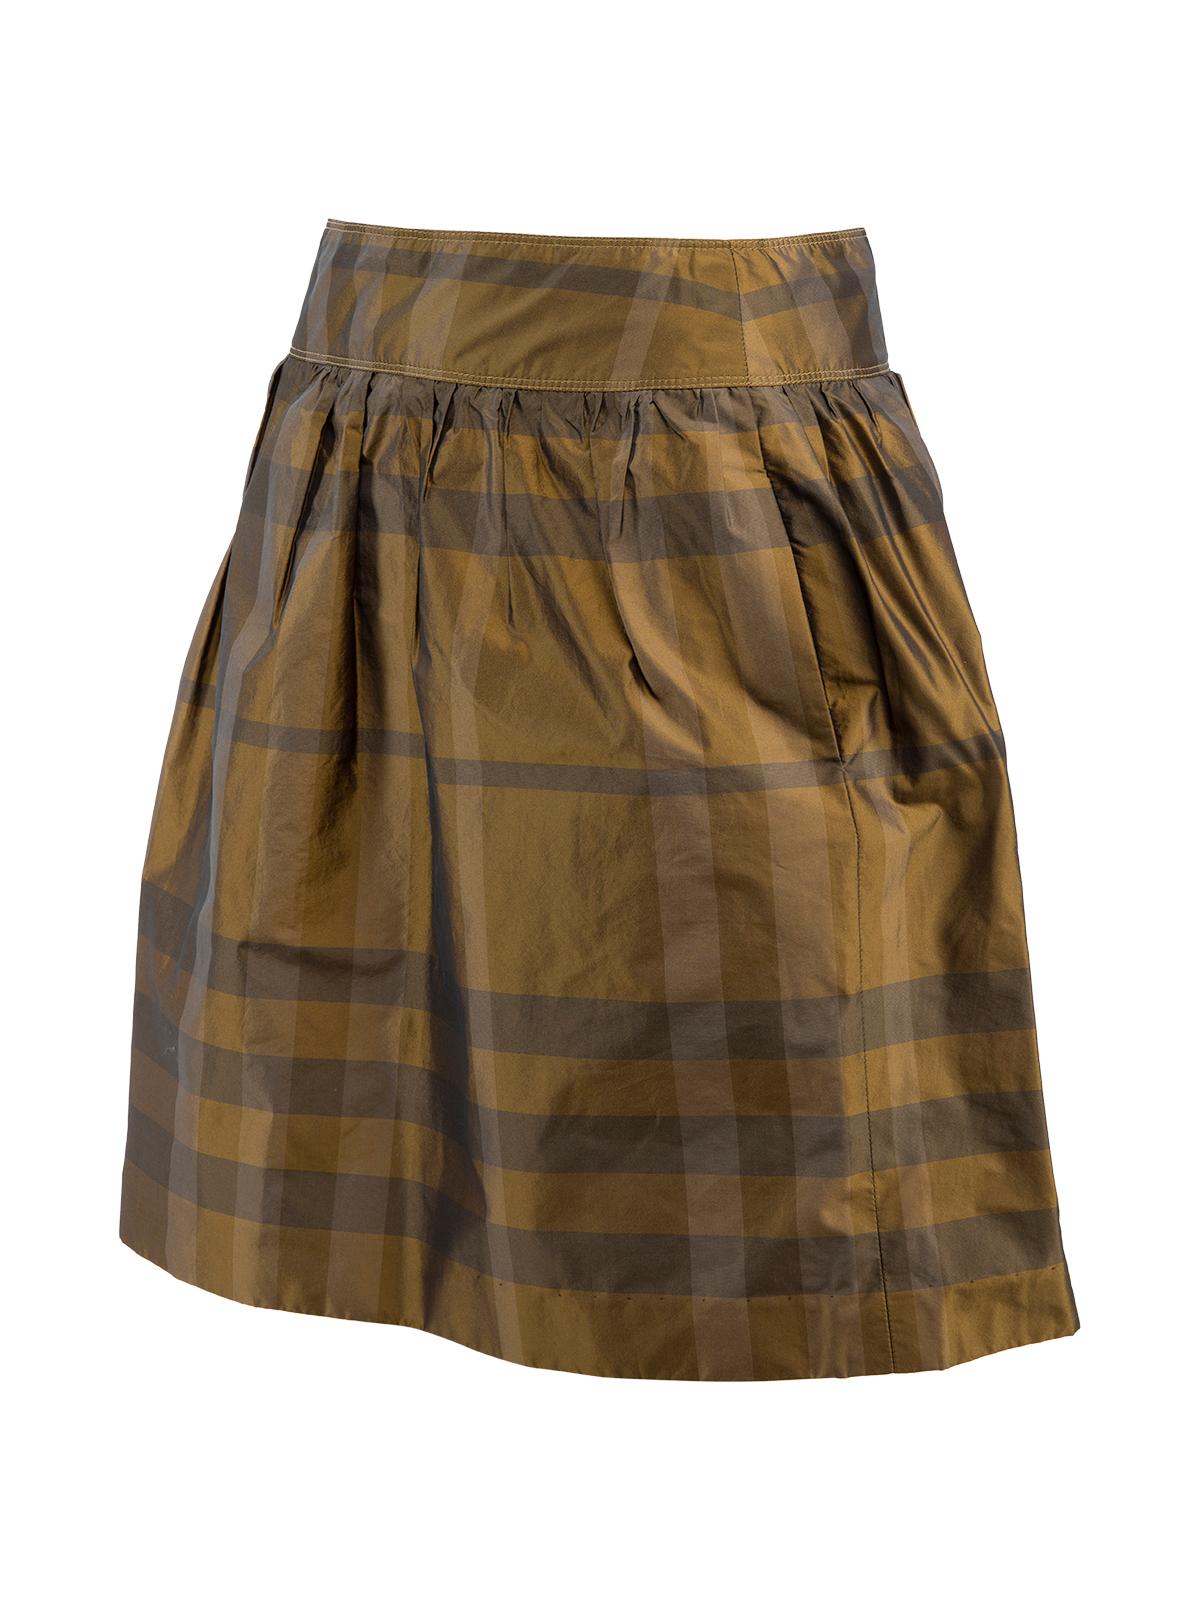 CONDITION is Very good. Hardly any visible wear to skirt is evident. There are some stick marks that can bee seen at the bottom of skirt on this used Burberry designer resale item. Details Metallic Khaki Signature Burberry pattern A line Zip